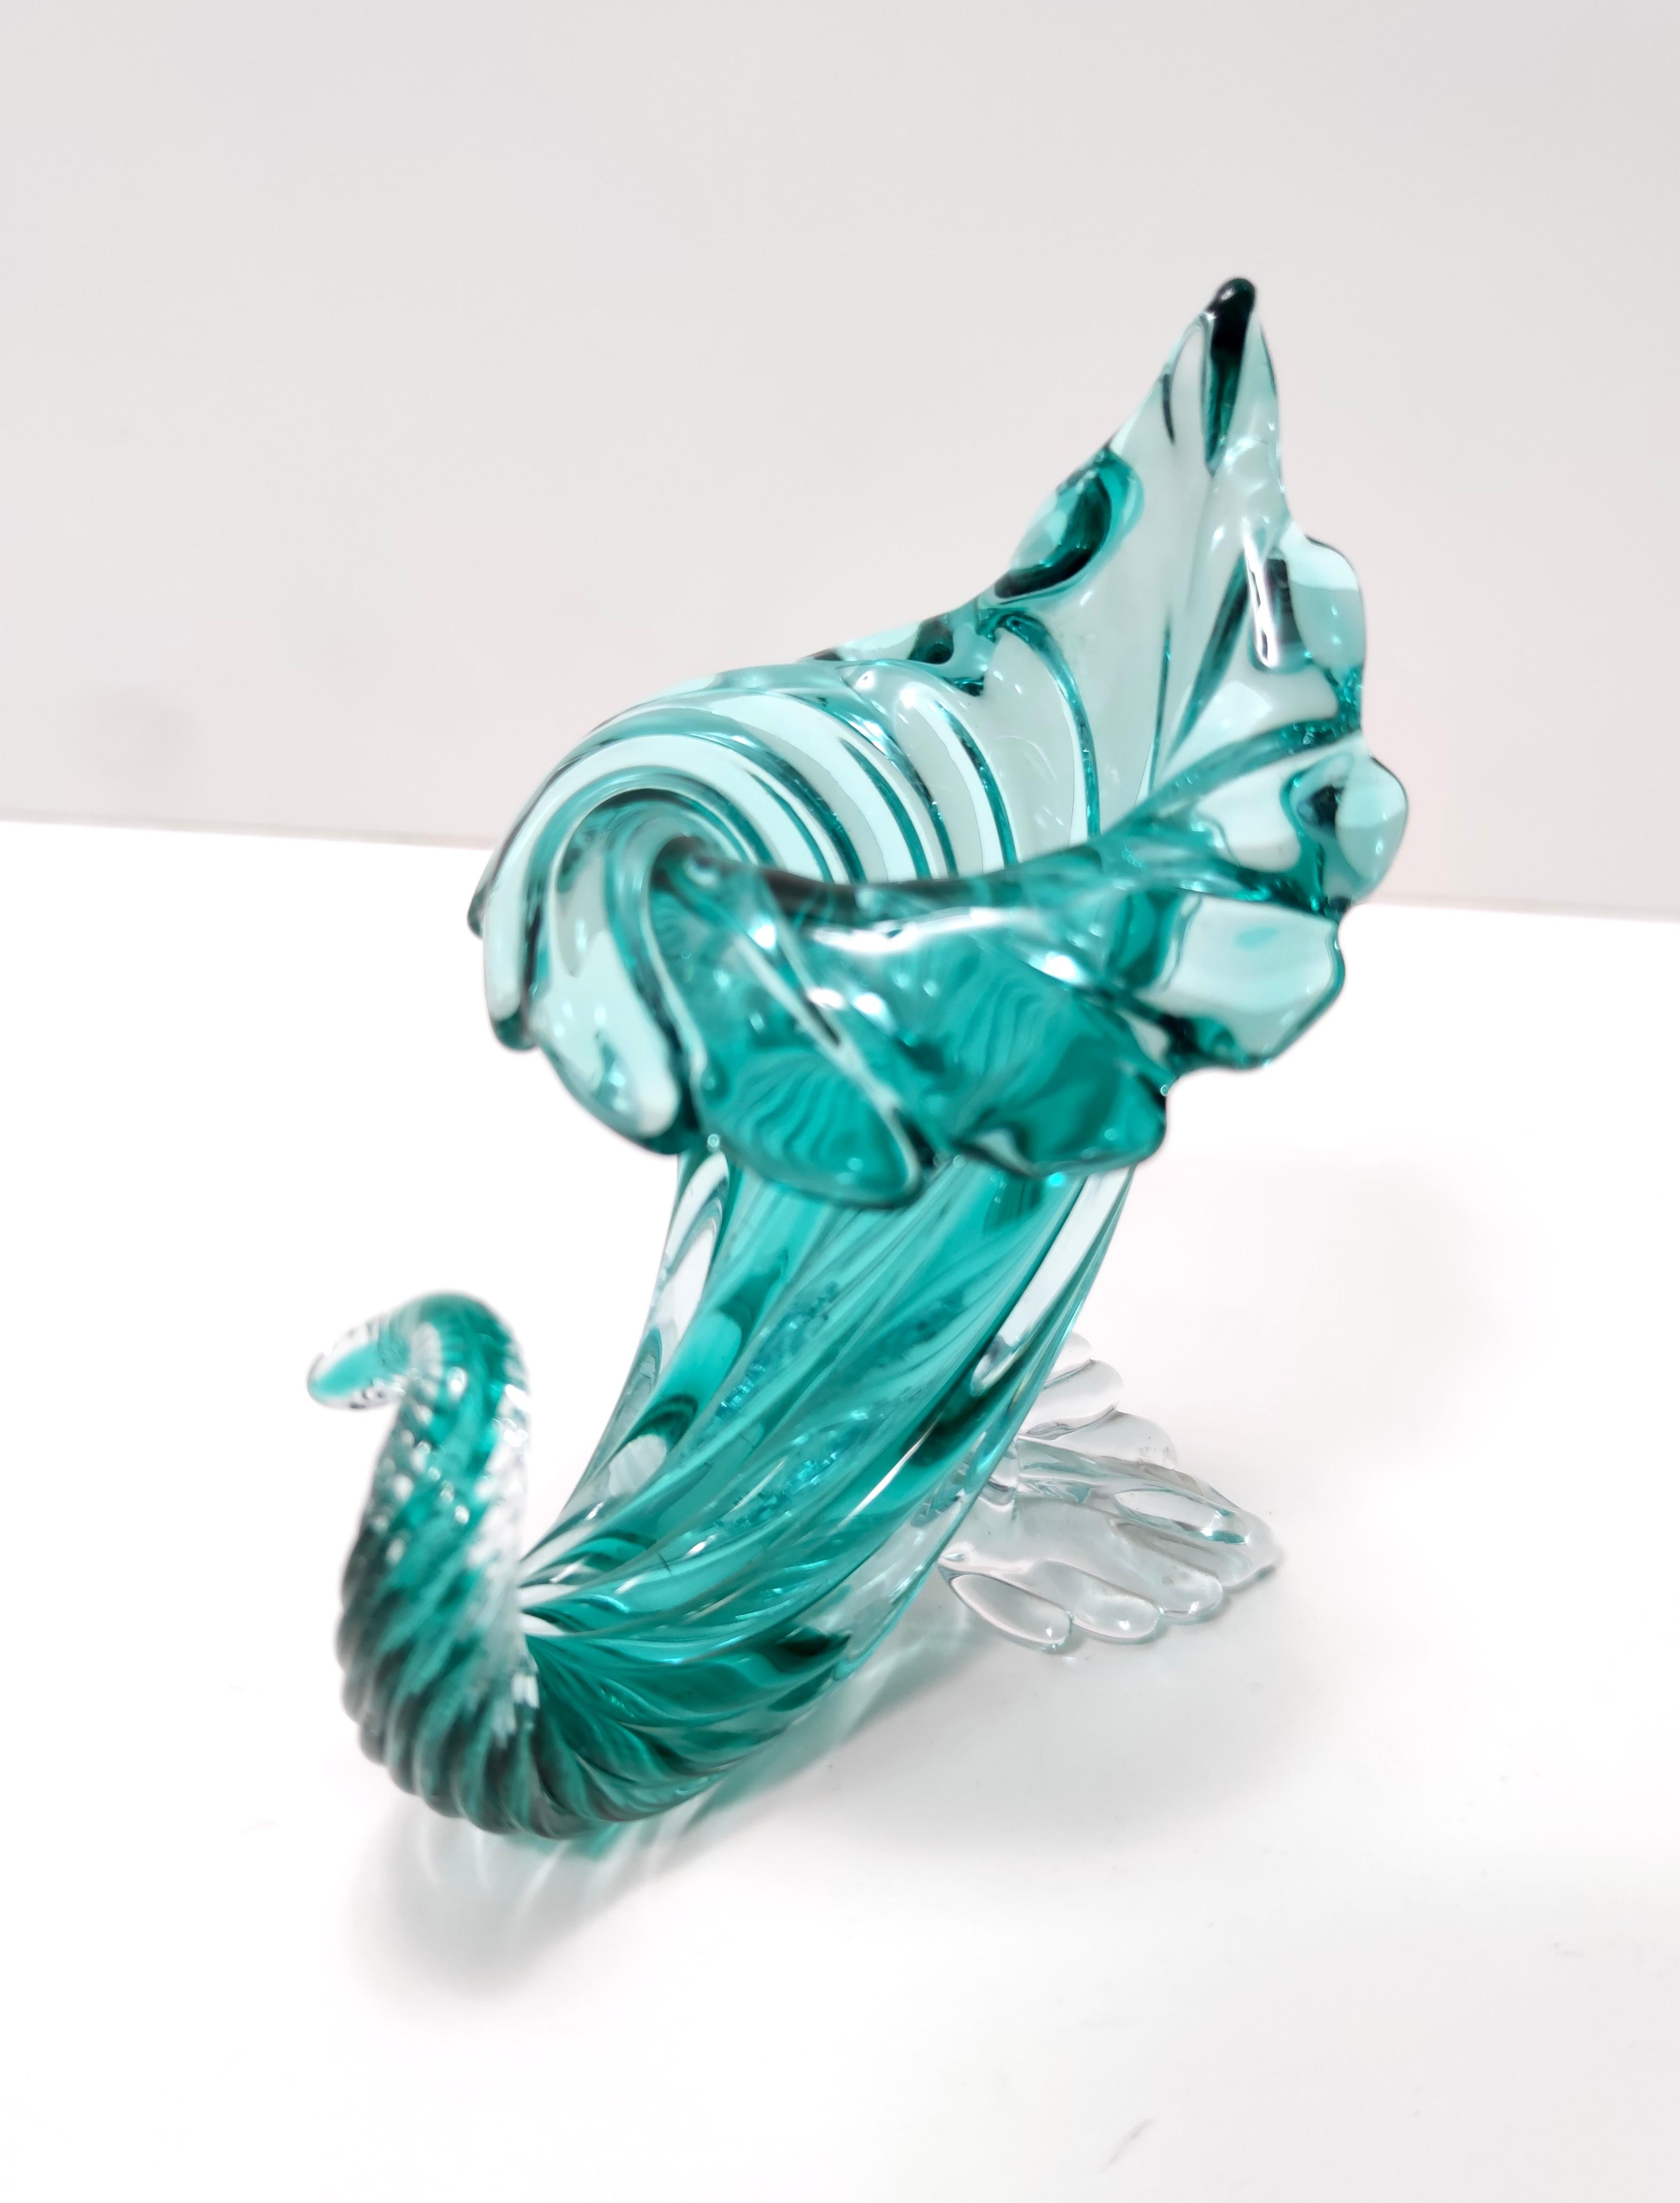 Vintage Teal Murano Glass Cornucopia Vase by Archimede Seguso, Italy For Sale 3